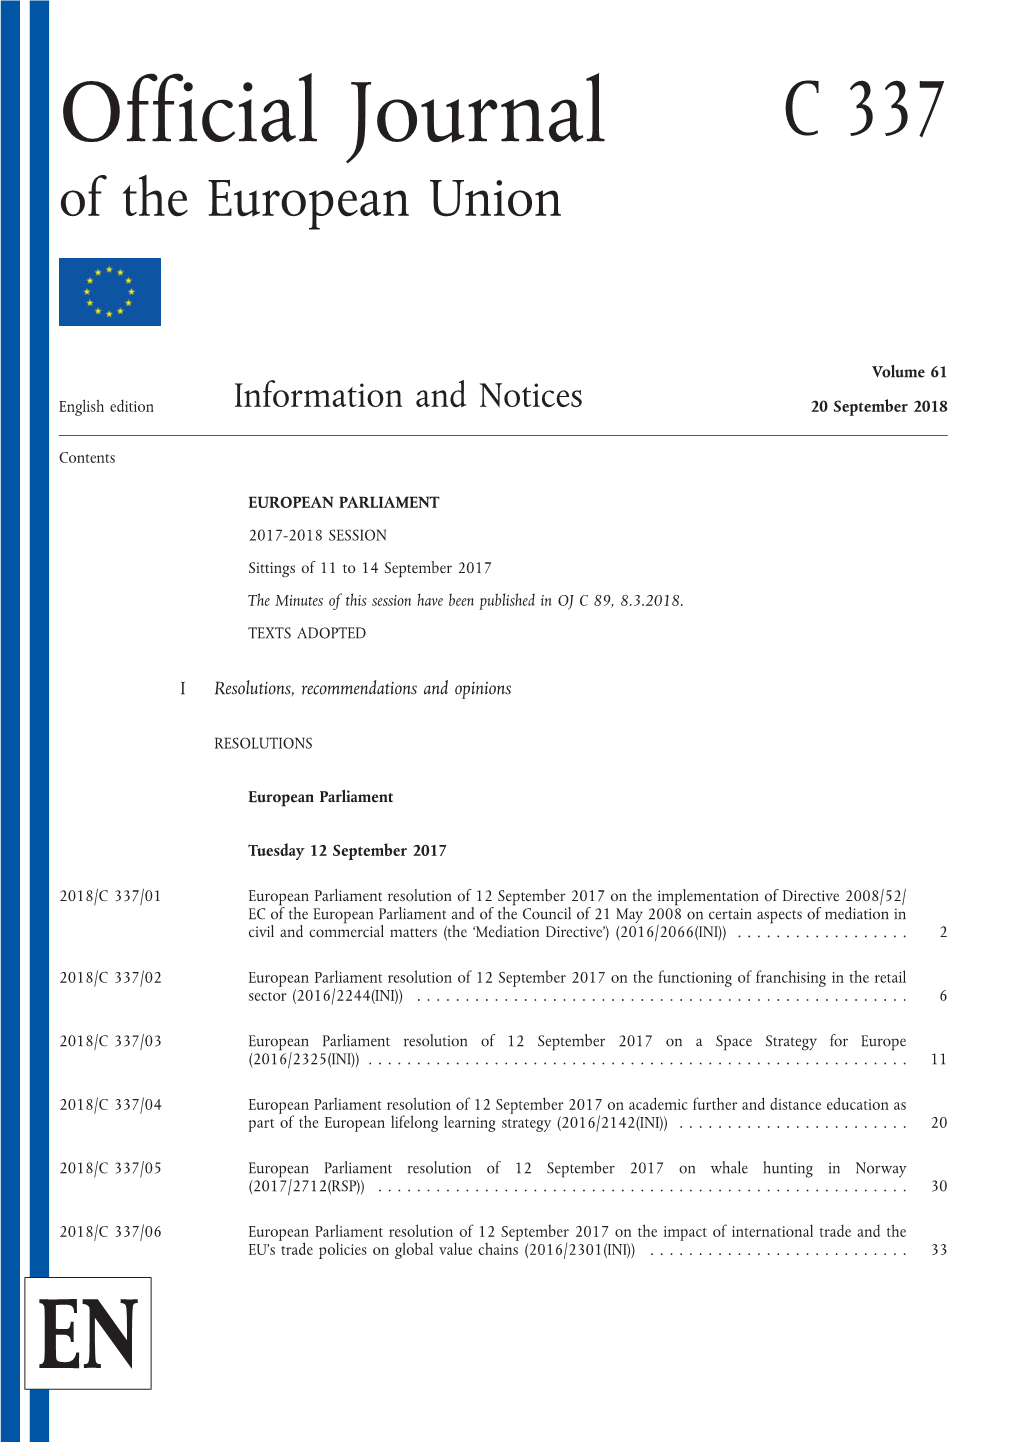 Official Journal of the European Union C 337/1